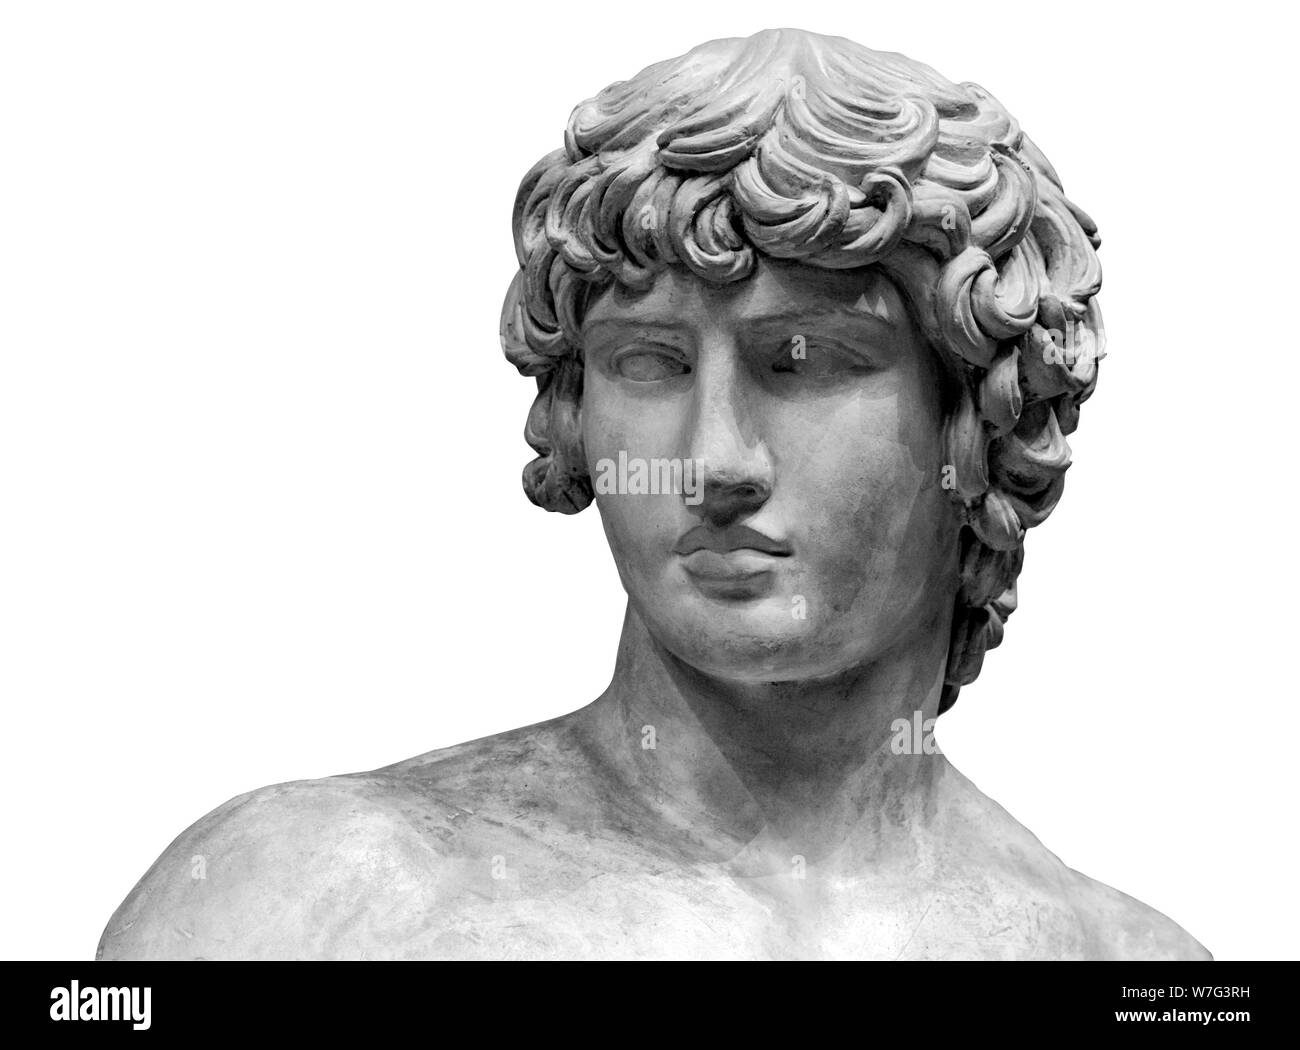 Head and shoulders detail of the ancient sculpture. Isolated on white background. Stock Photo